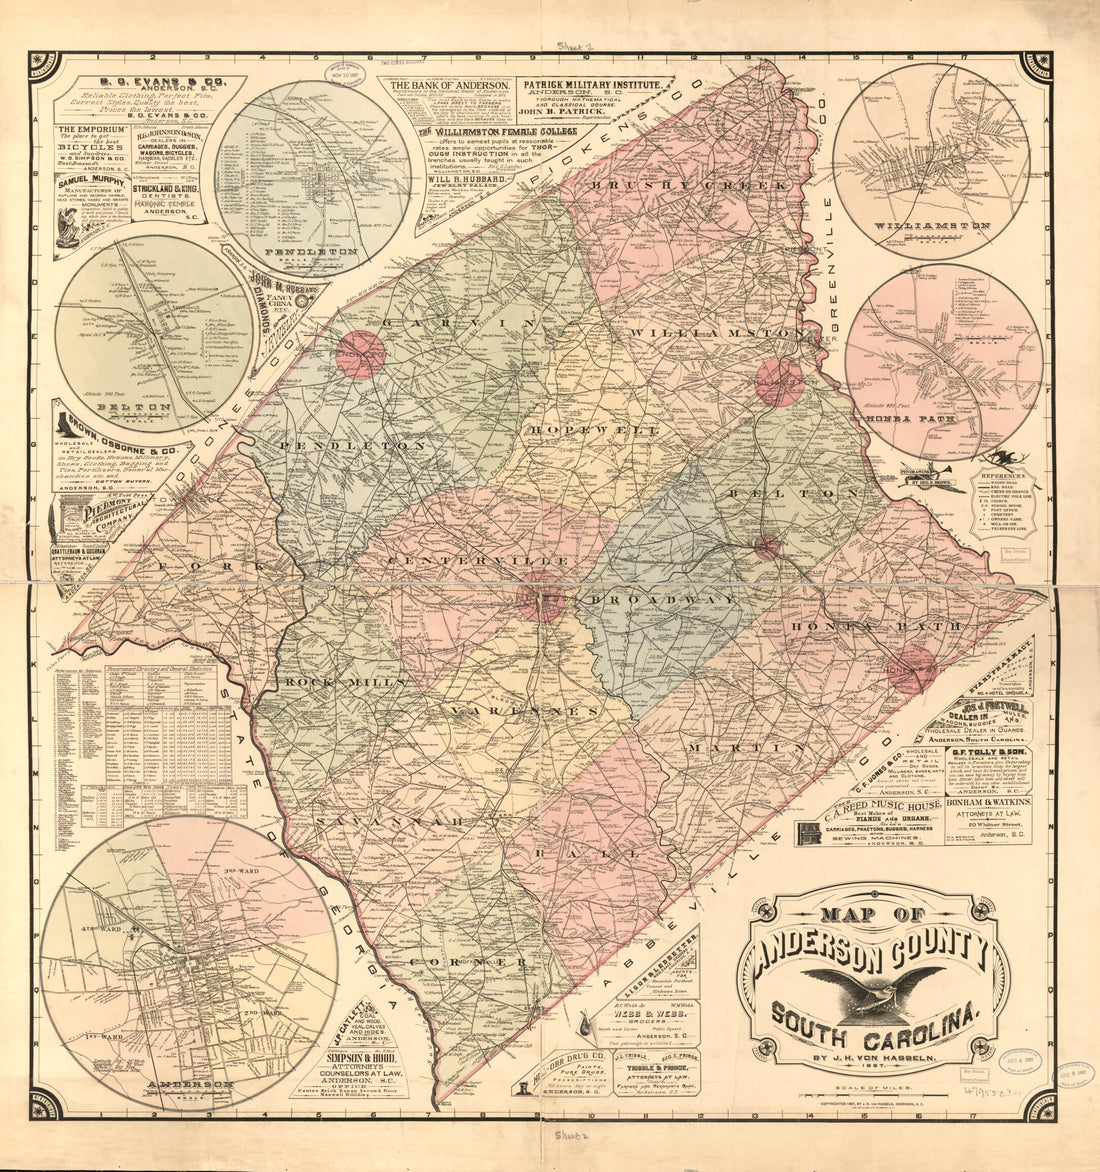 This old map of Map of Anderson County, South Carolina (Anderson County, South Carolina) from 1897 was created by George B. Brown, J. H. Von Hasseln in 1897